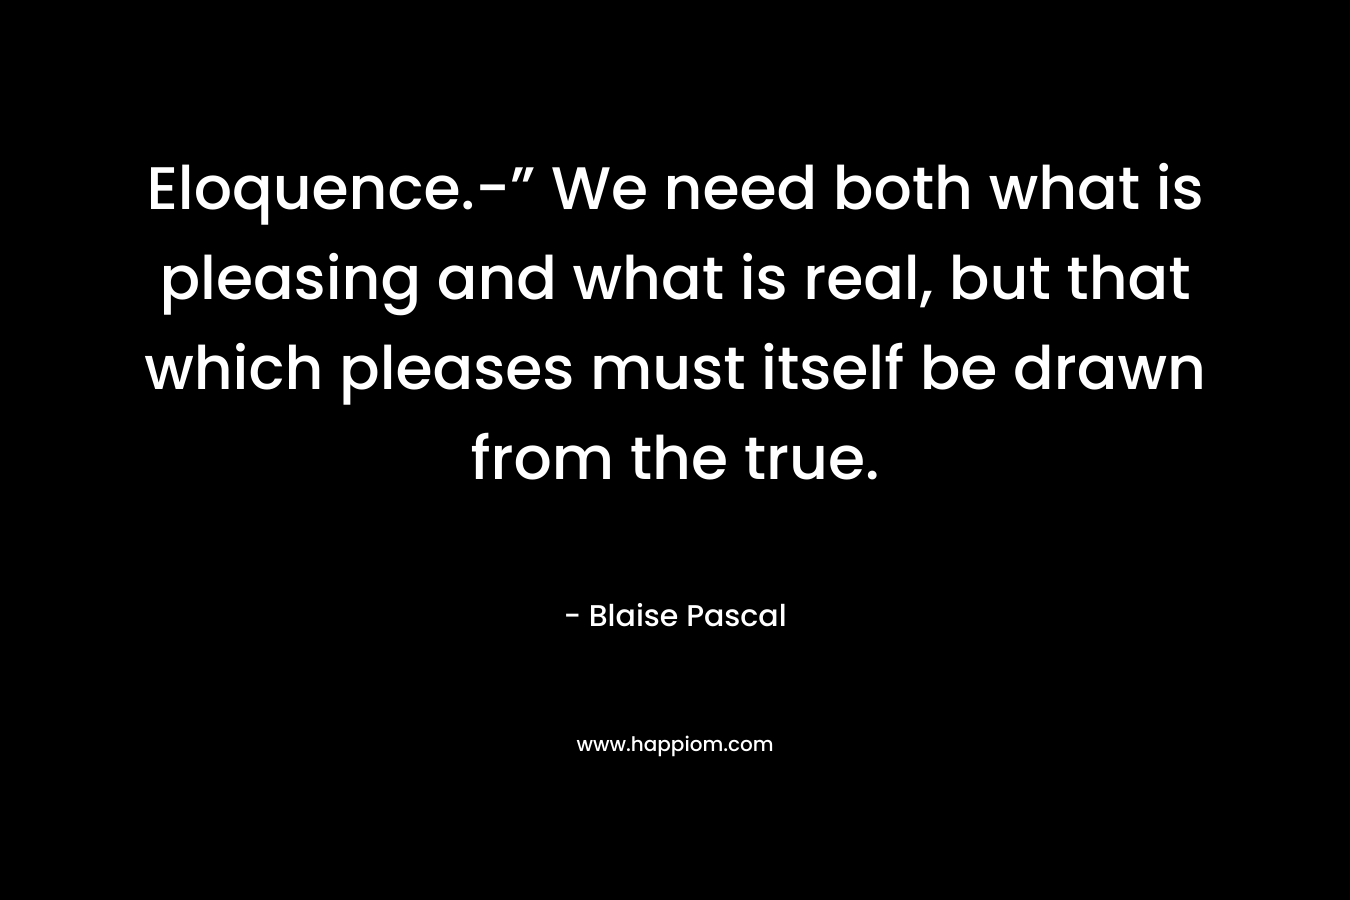 Eloquence.-” We need both what is pleasing and what is real, but that which pleases must itself be drawn from the true. – Blaise Pascal